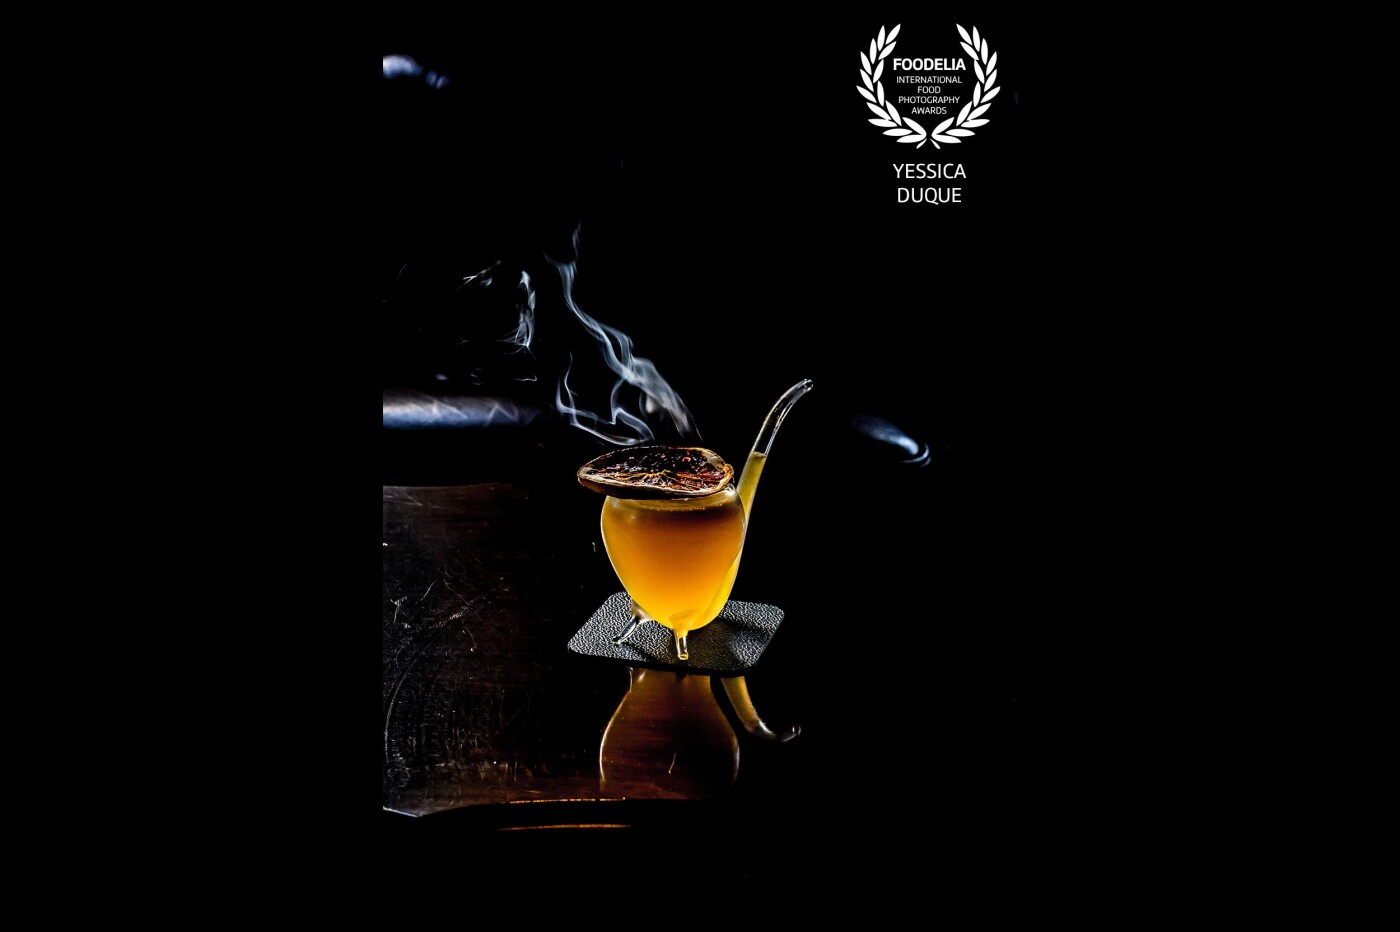 Passionate Smoker made by Francesco @the_court_cocktailbar Den Haag. Cheers!<br />
Shot with @CanonNederland EOS 5D Mark III & @sigmafotobenelux 50mm f/1.4 art.<br />
ISO500 F/9 1/80s⁠<br />
Speedlite 600EXII-RT + daylight